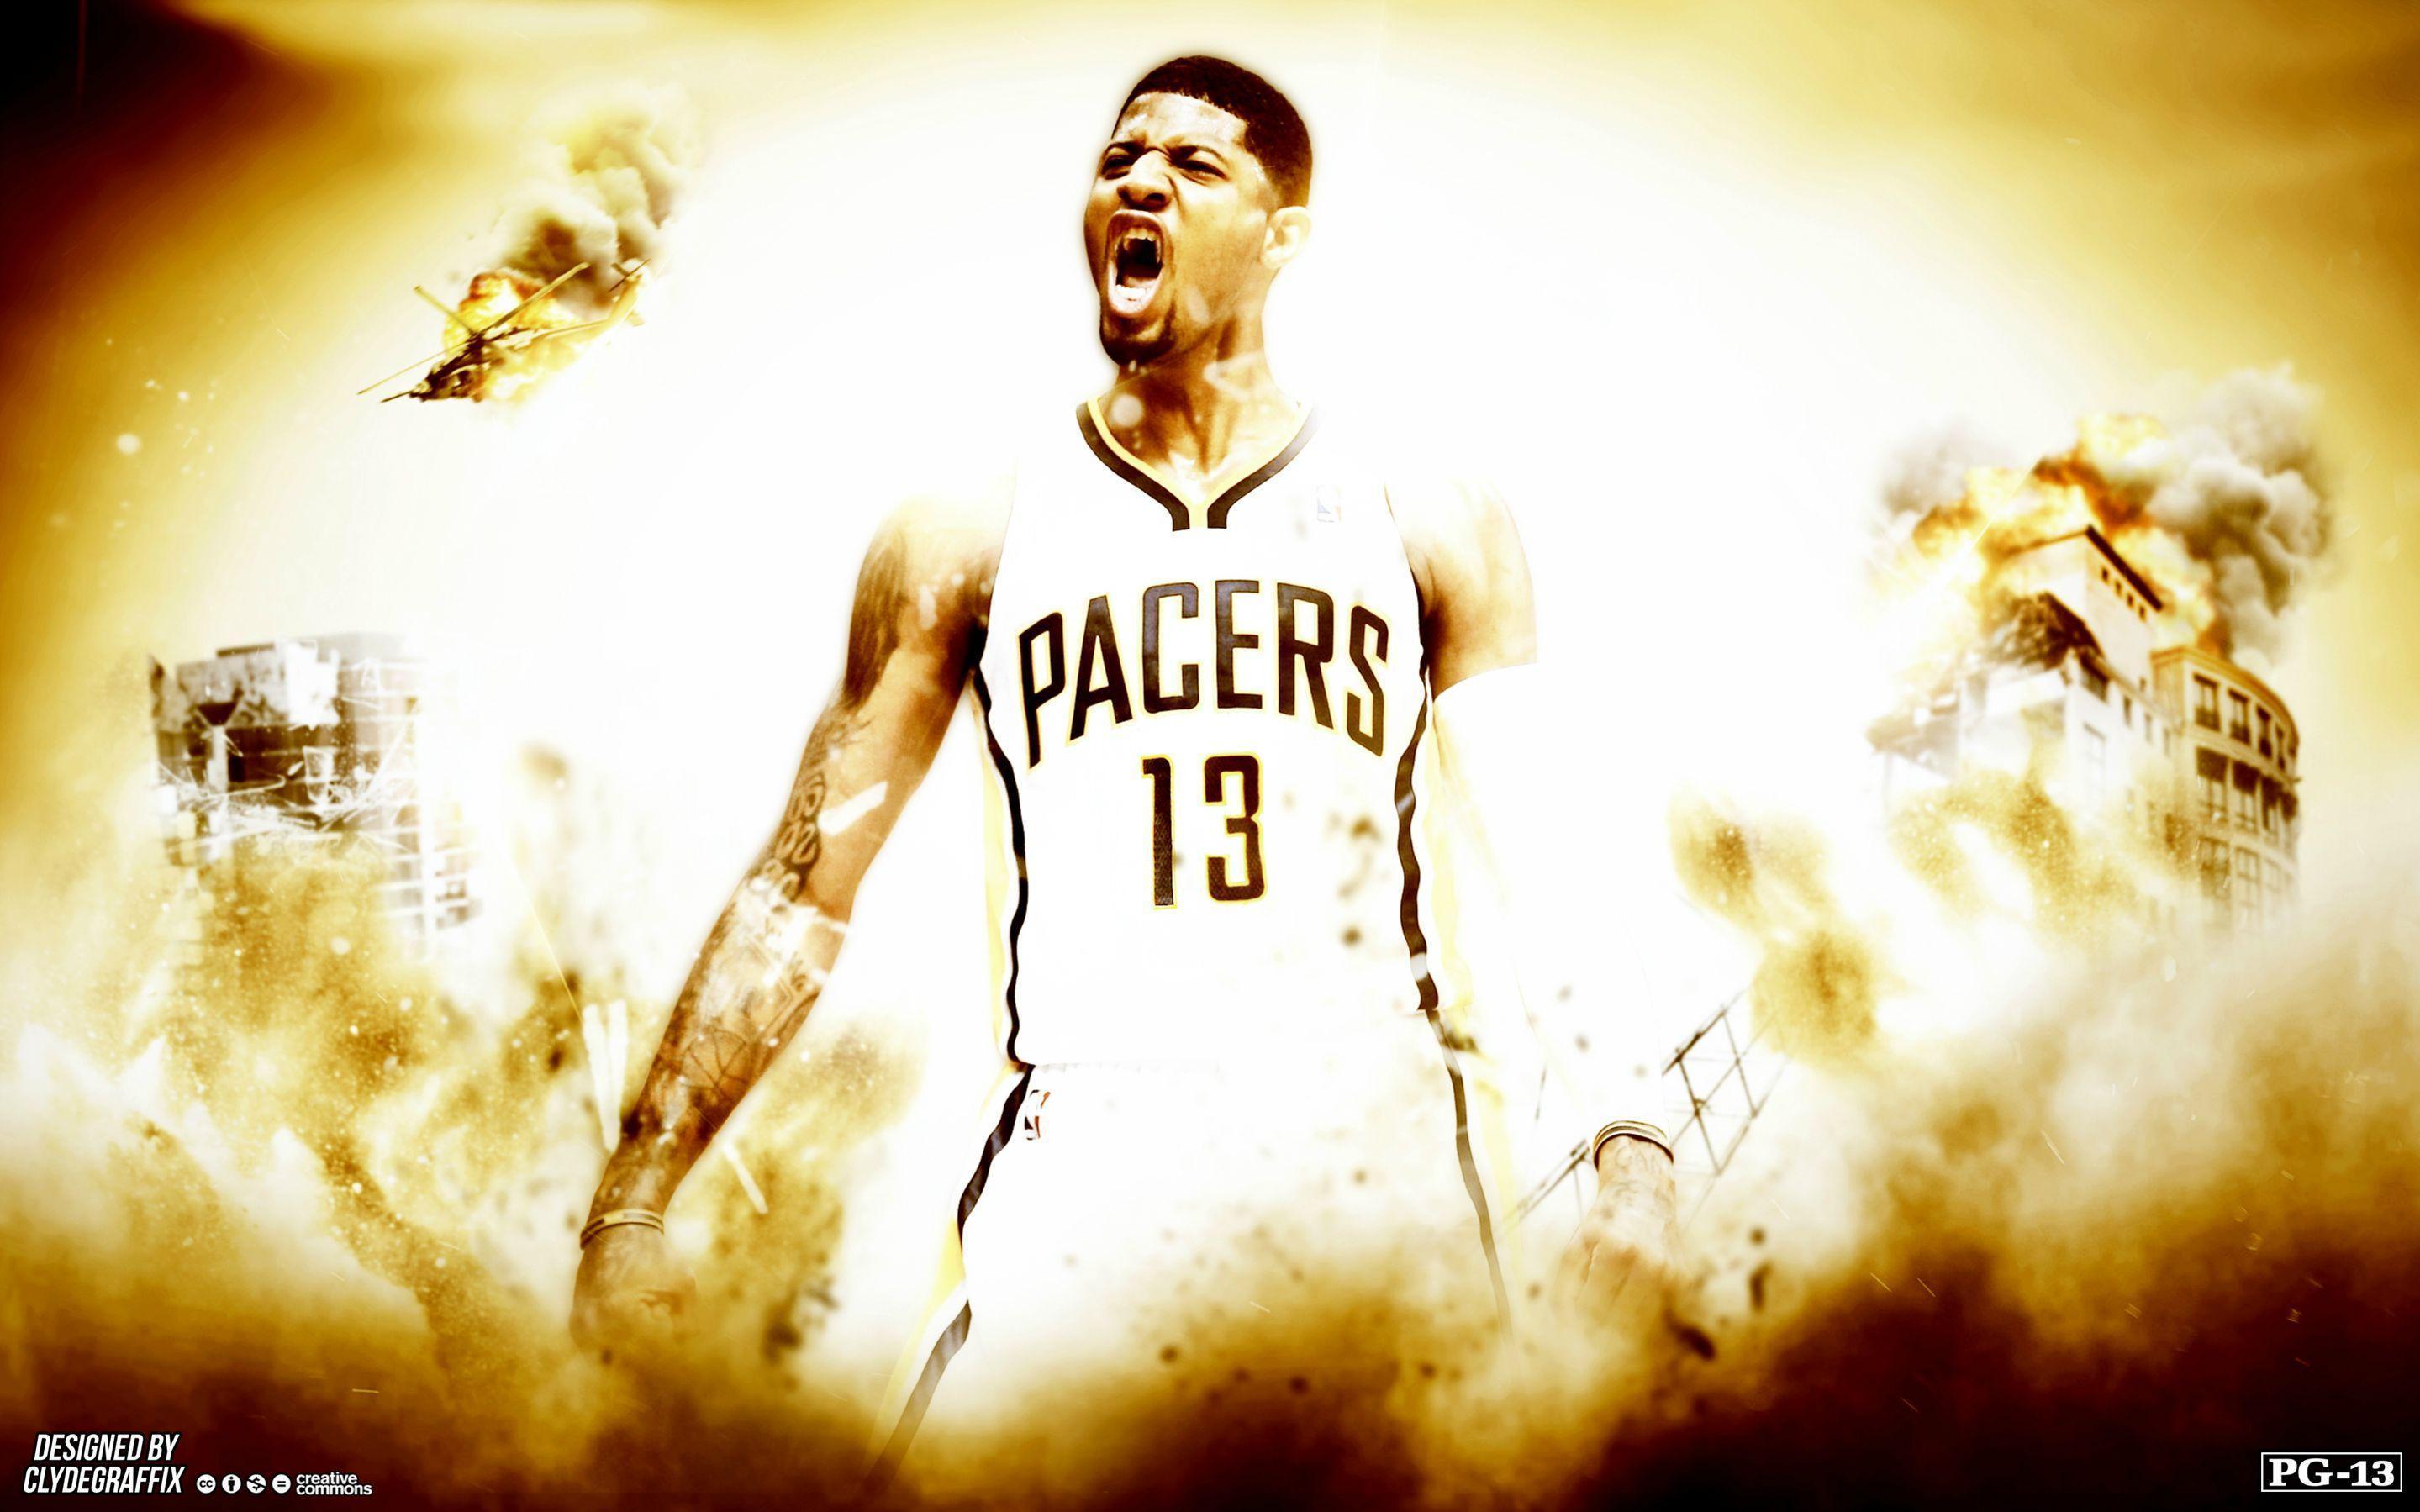 Made a Paul George wallpaper I thought you guys might like!